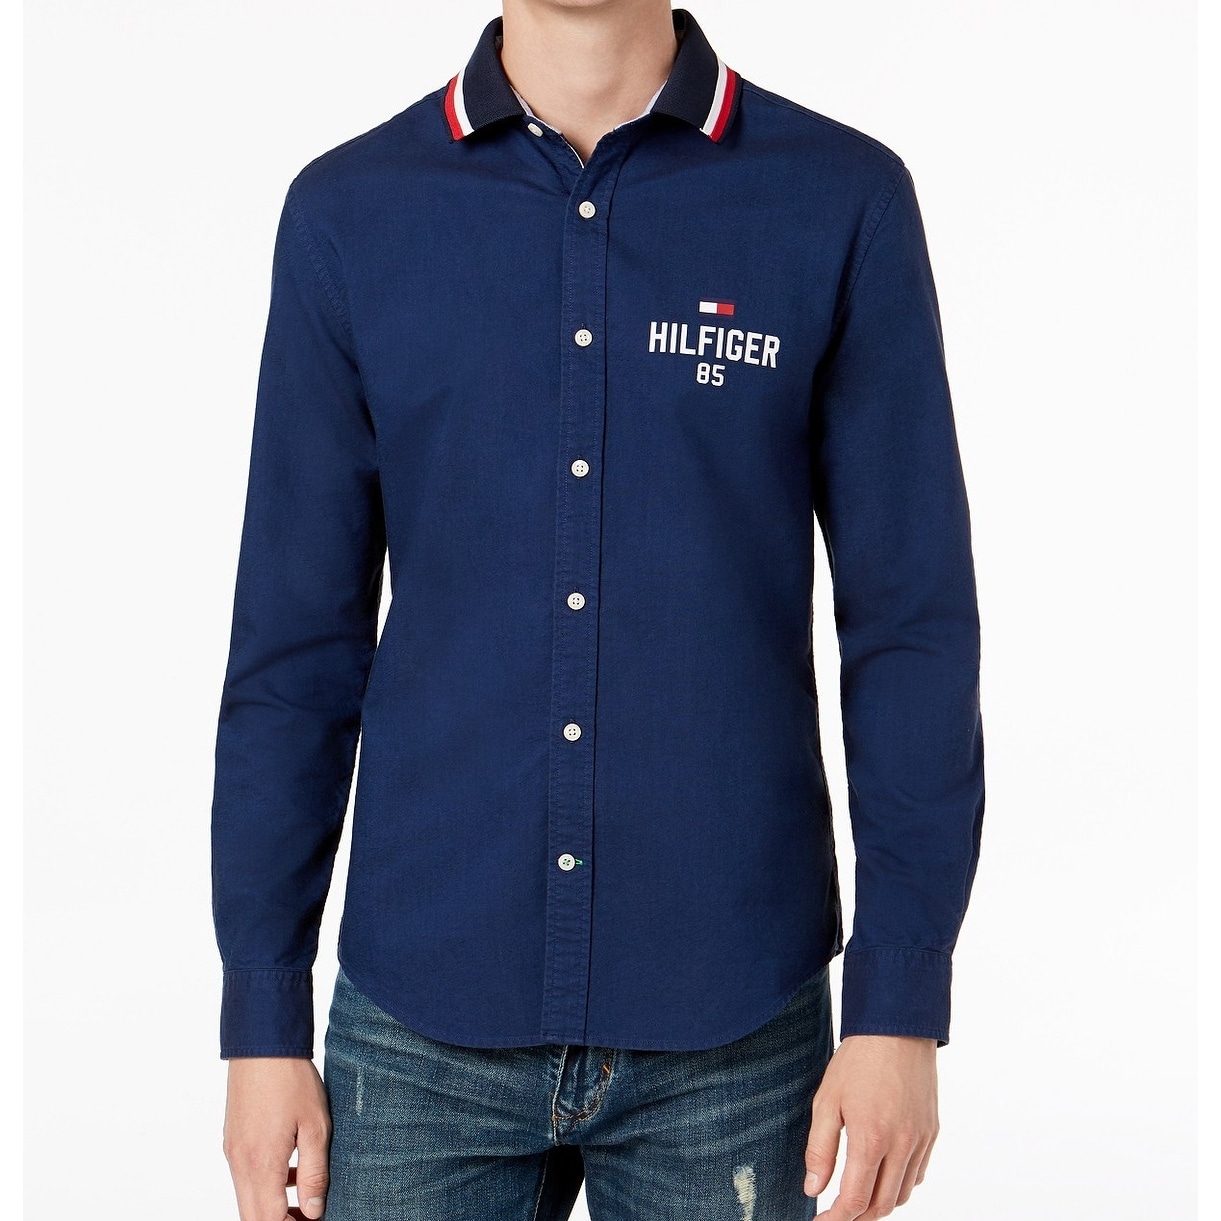 Flecha entrevista suizo Shop Tommy Hilfiger Blue Men Small S Button Down England Alan Slim Shirt -  Free Shipping On Orders Over $45 - Overstock - 28136577